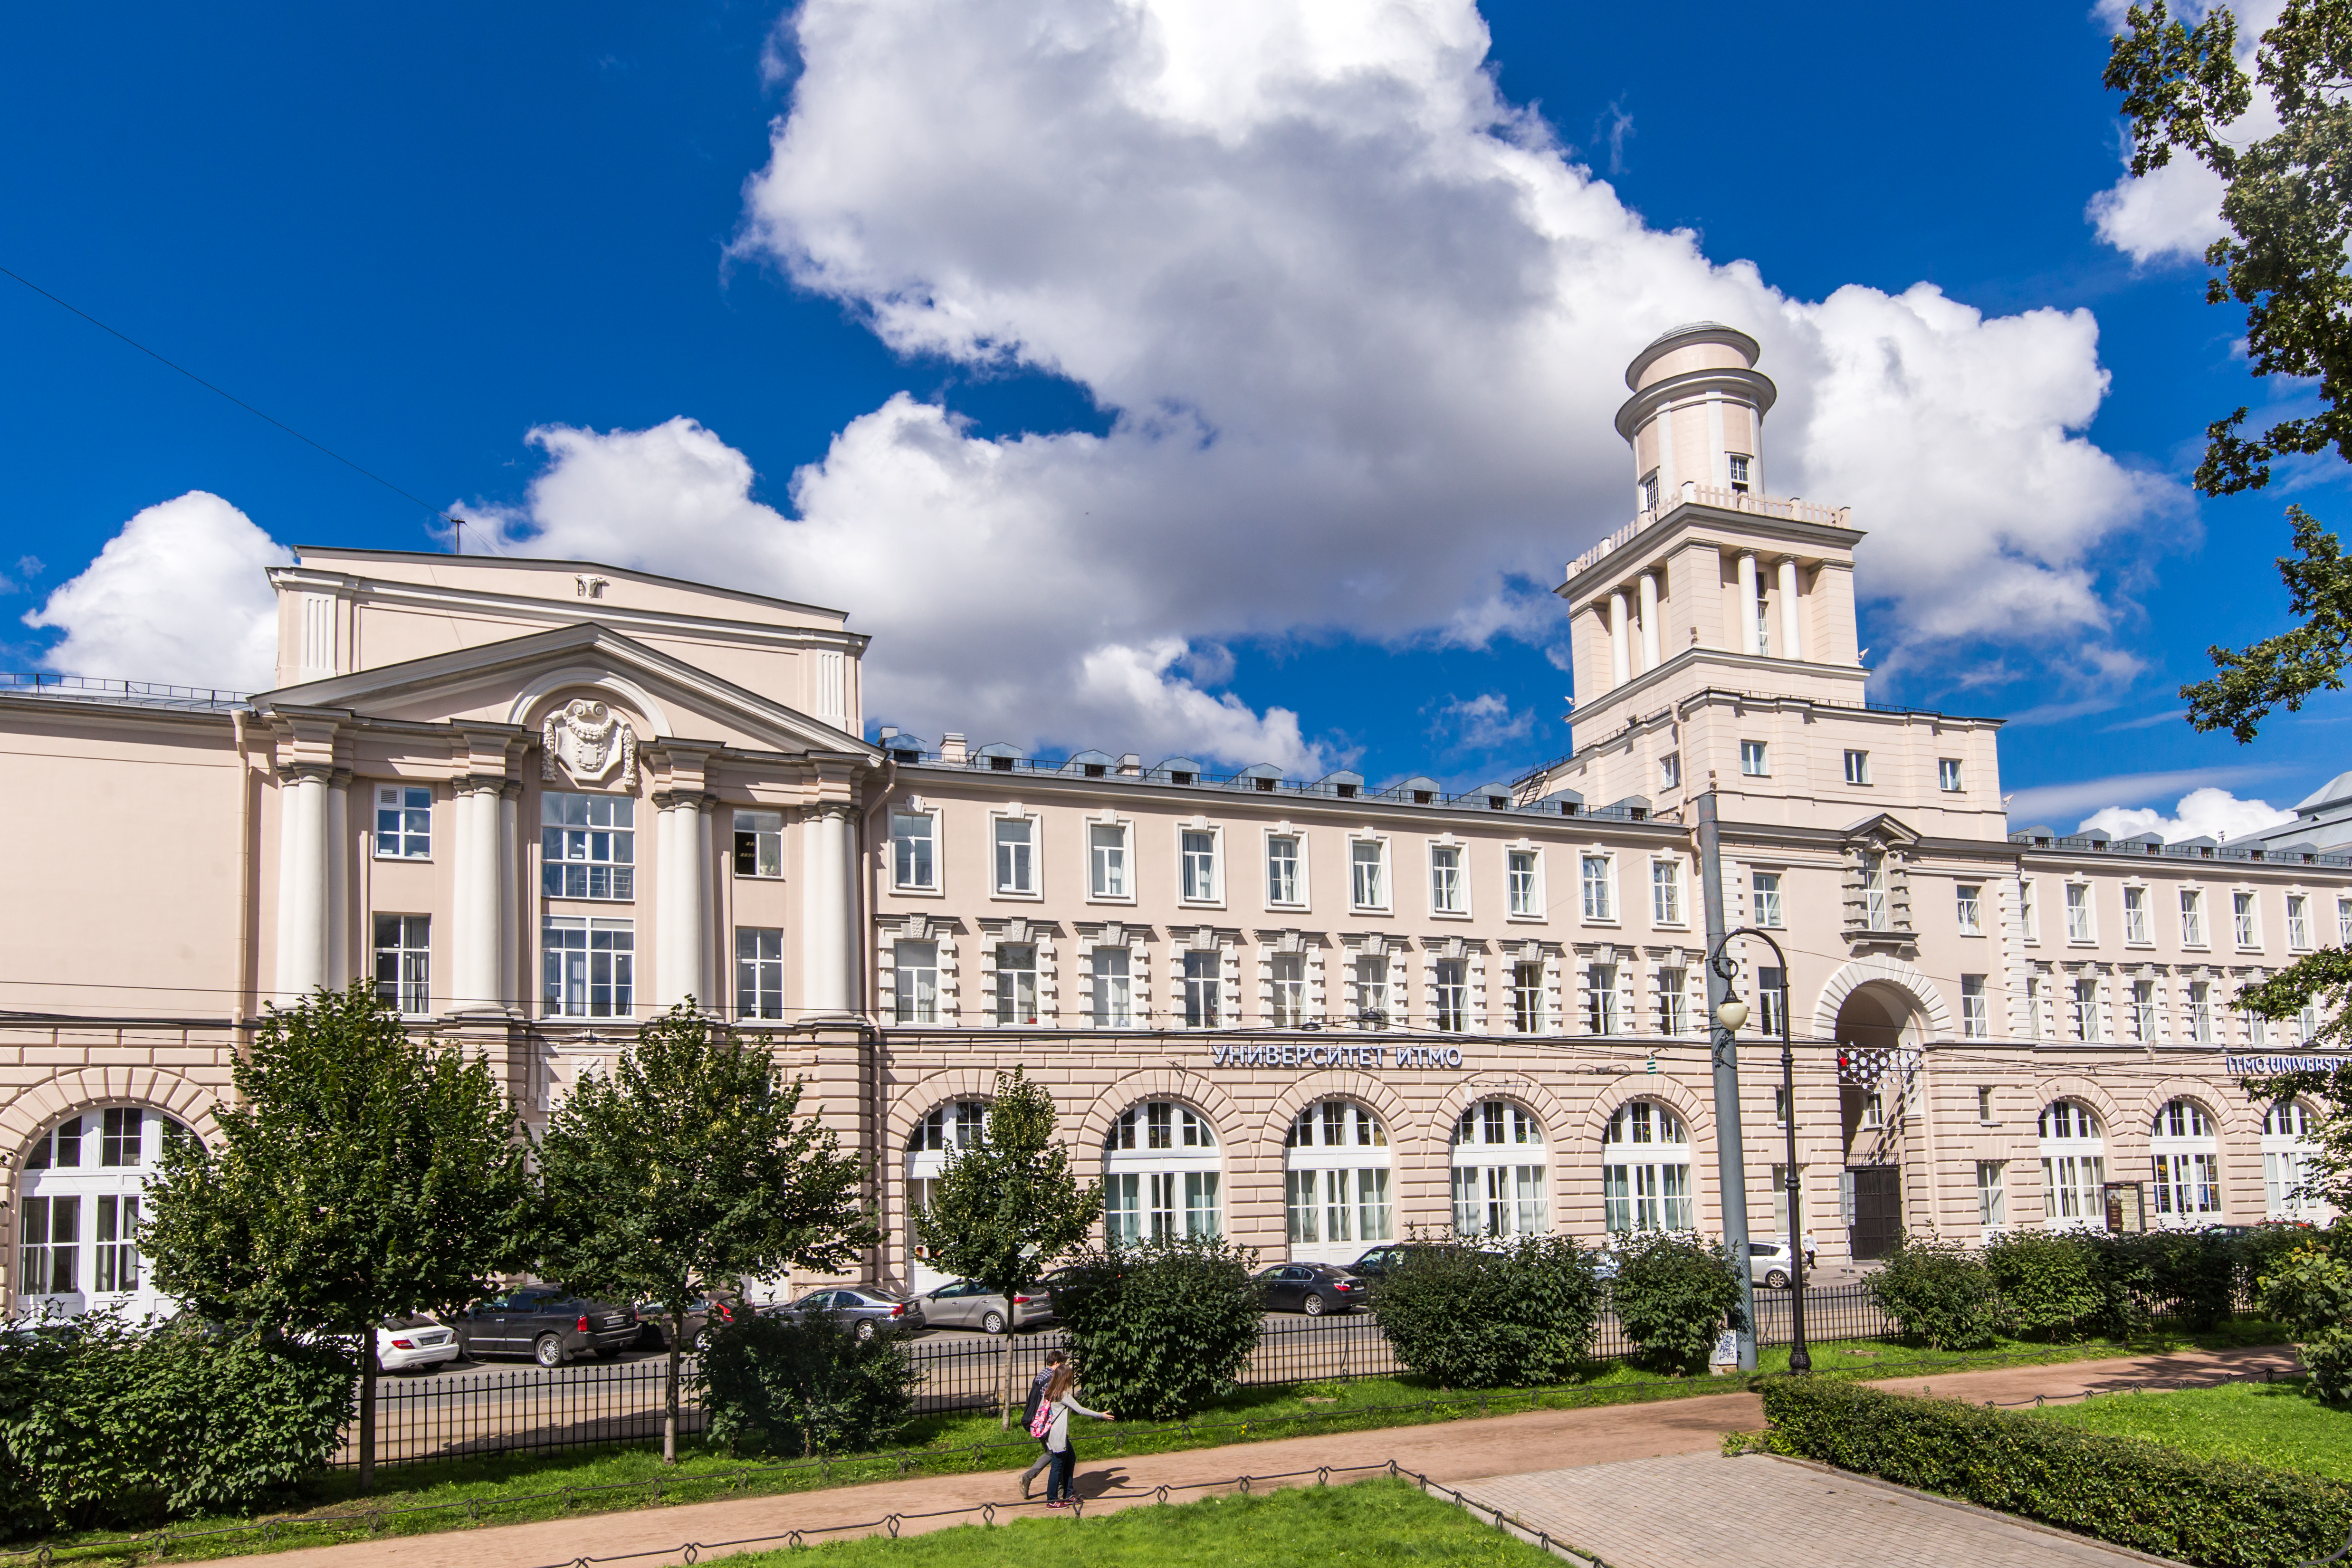 Most Russian universities (9 out of 13) have seen their standings slip in comparison to last year. Photo: ITMO University in St. Petersburg.